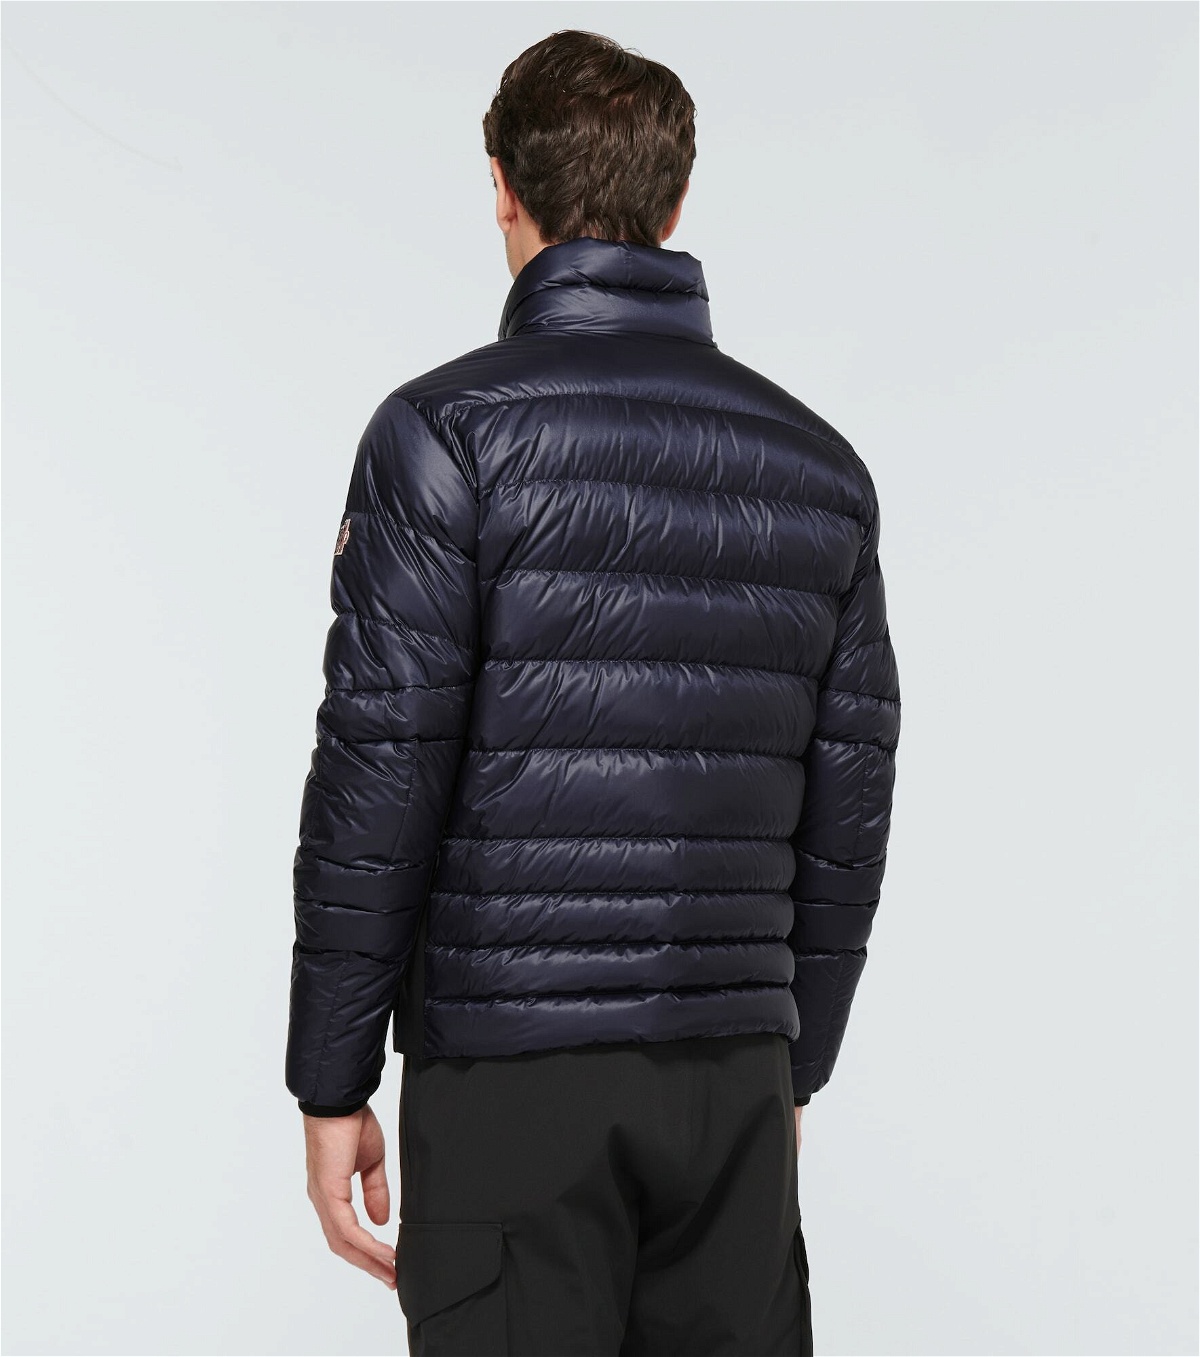 Moncler Grenoble - Canmore down jacket Moncler Grenoble